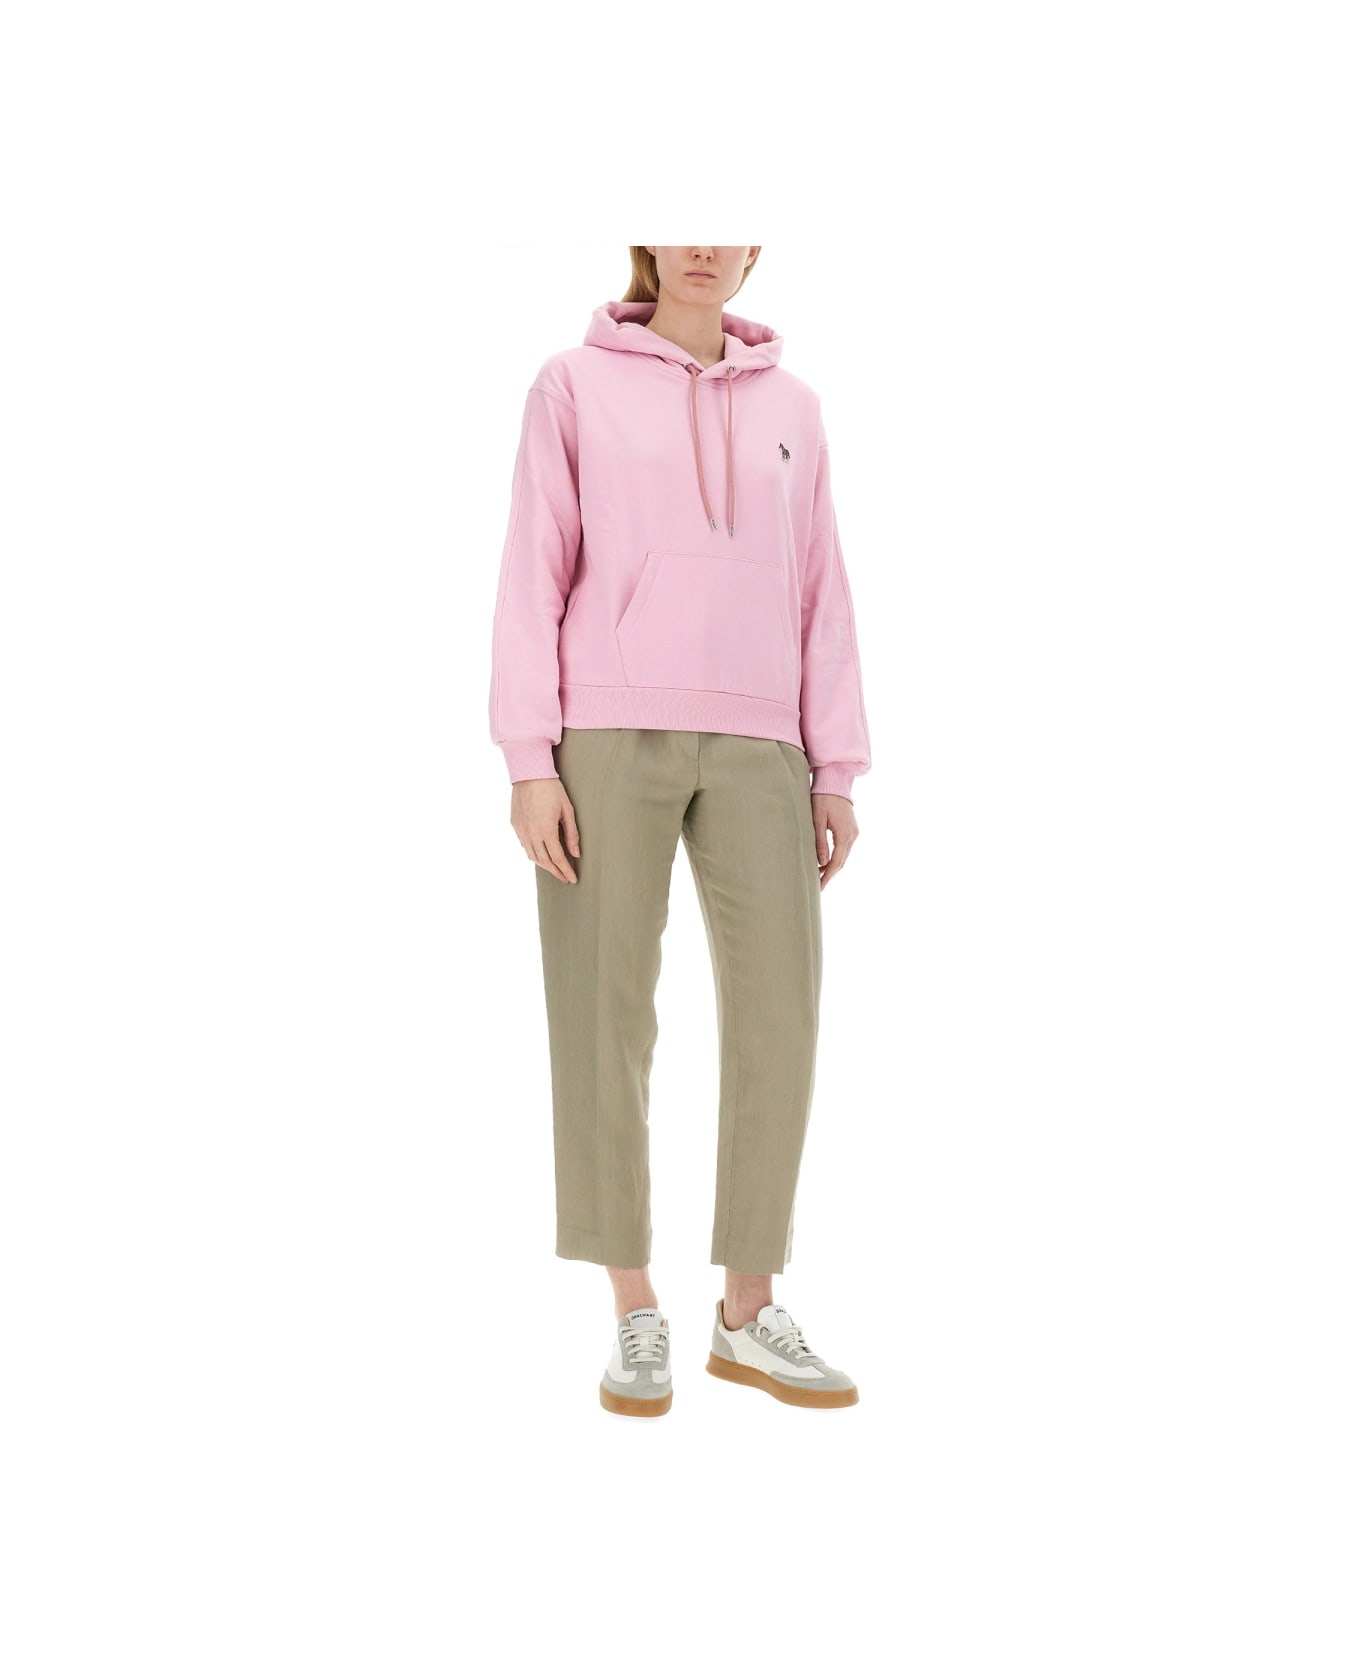 PS by Paul Smith Sweatshirt With Logo - PINK フリース